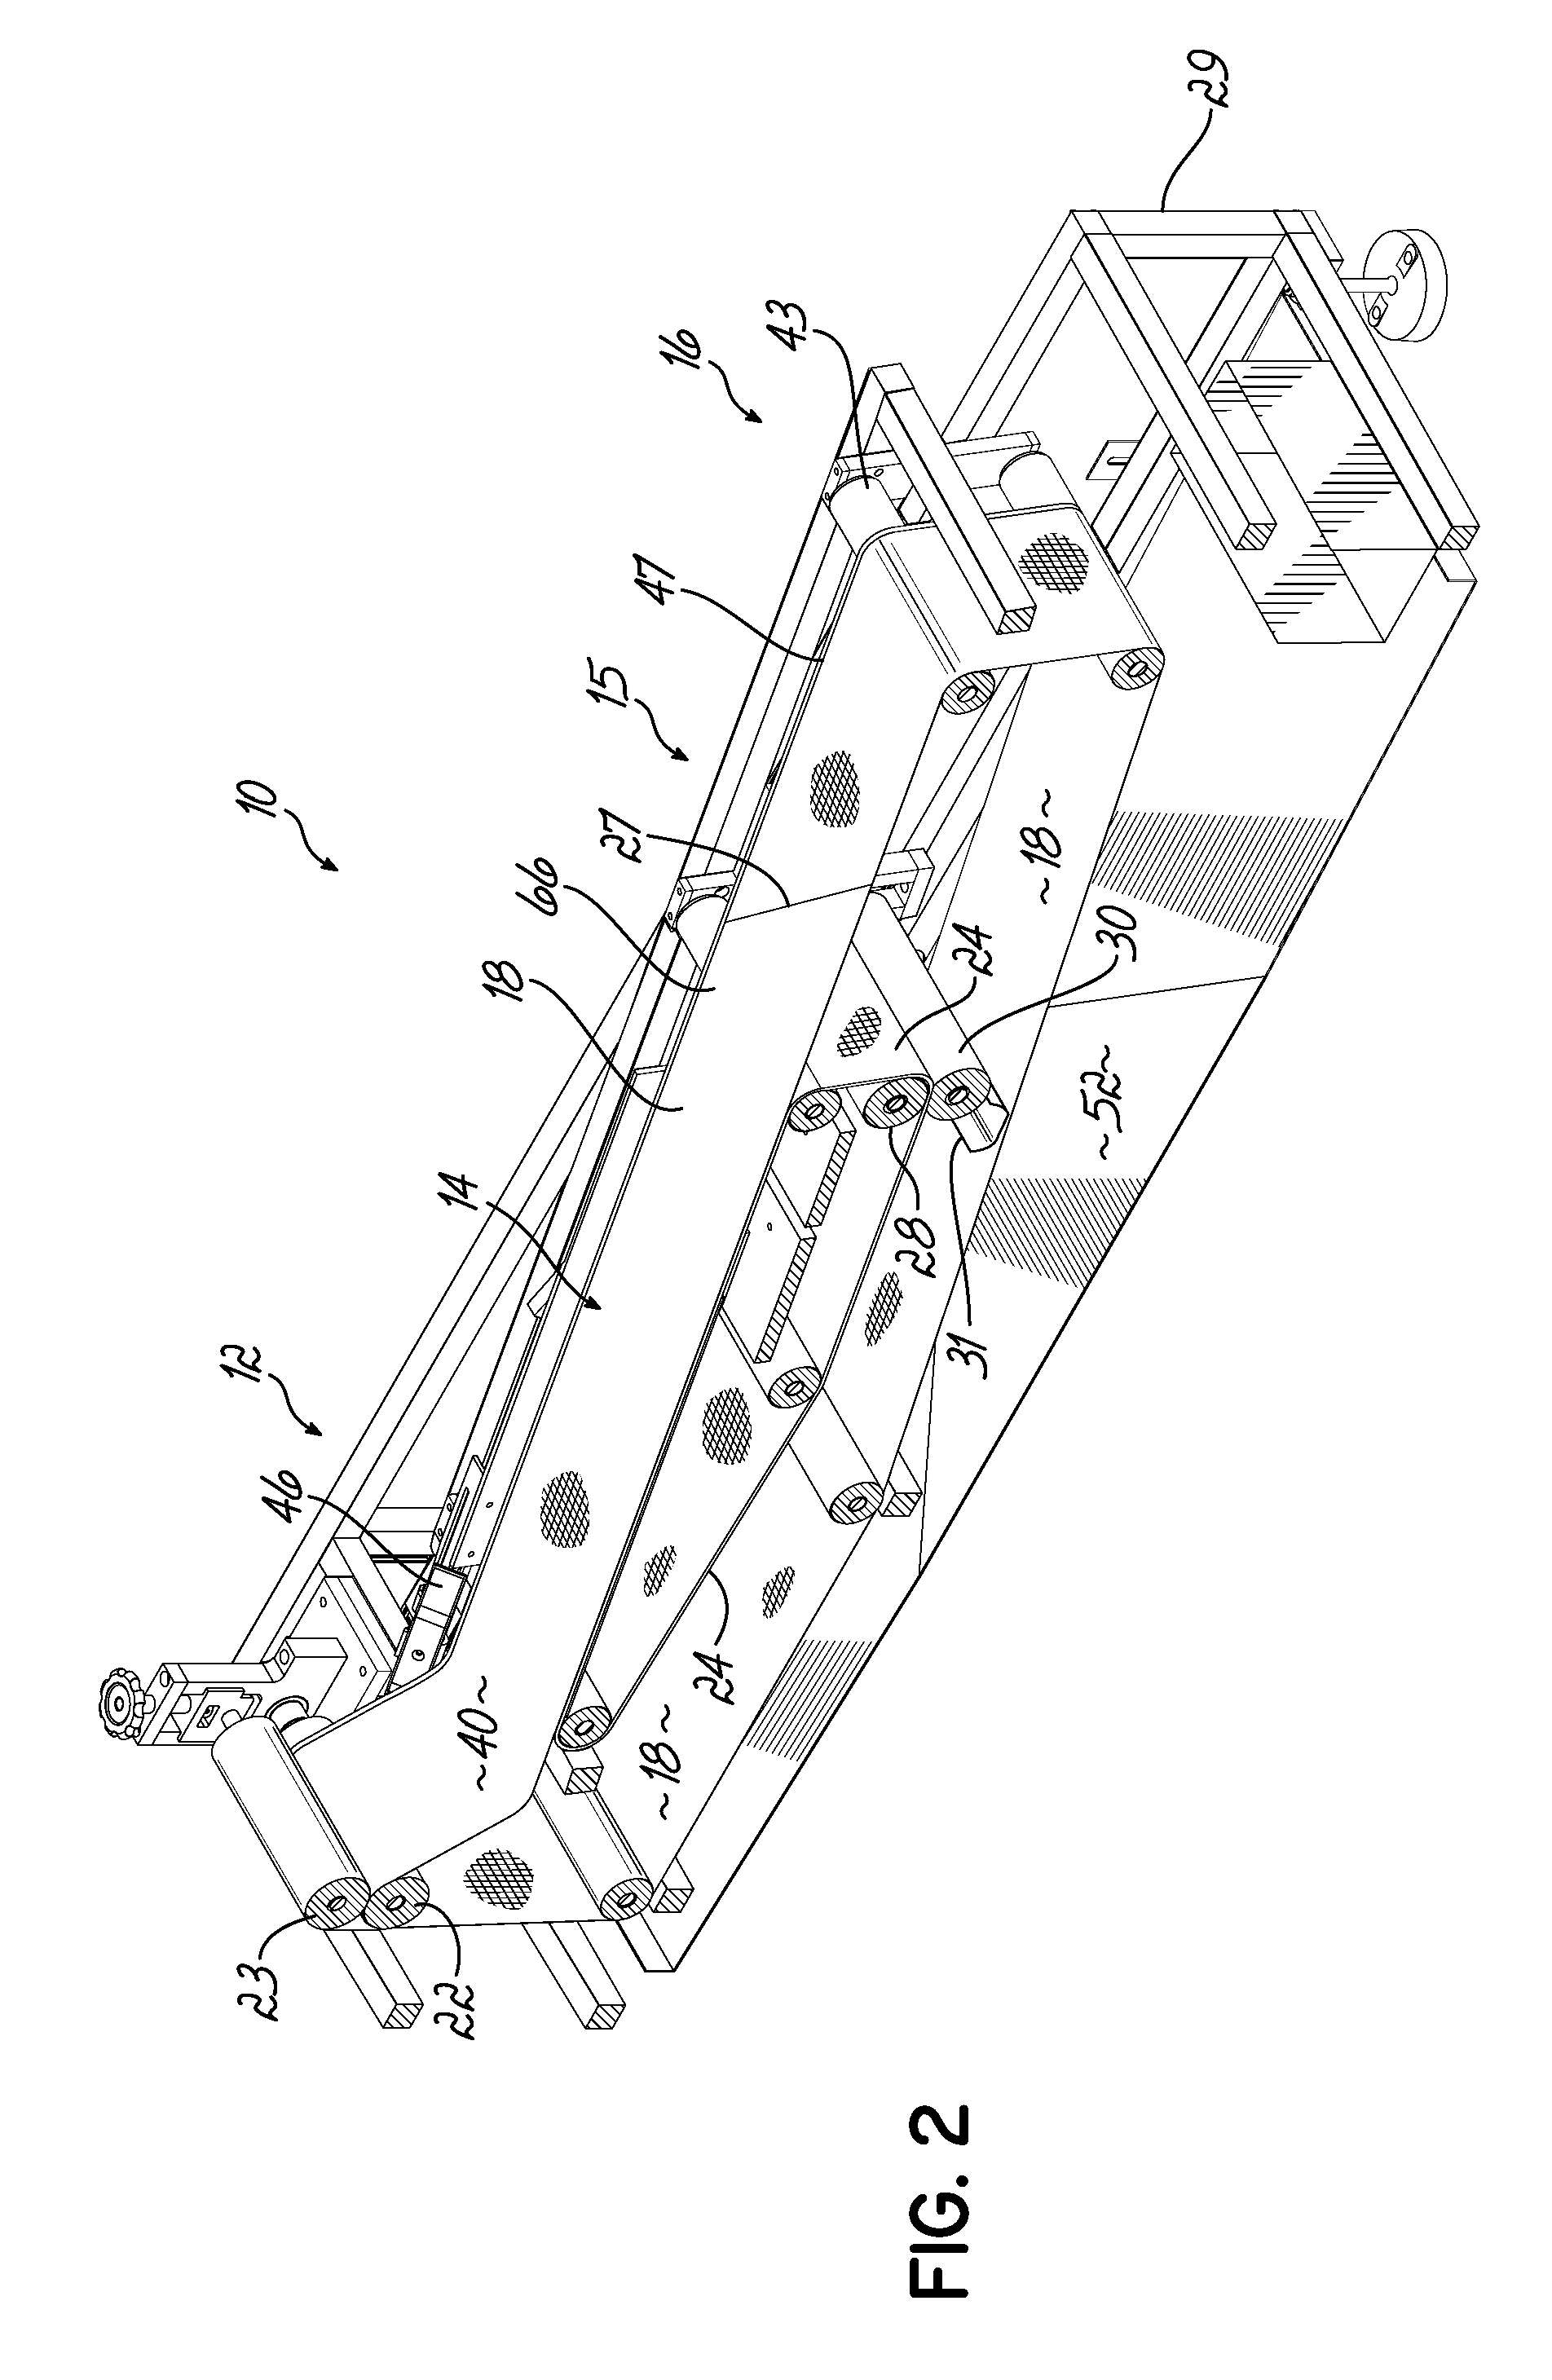 Method and apparatus for separating particles from a liquid